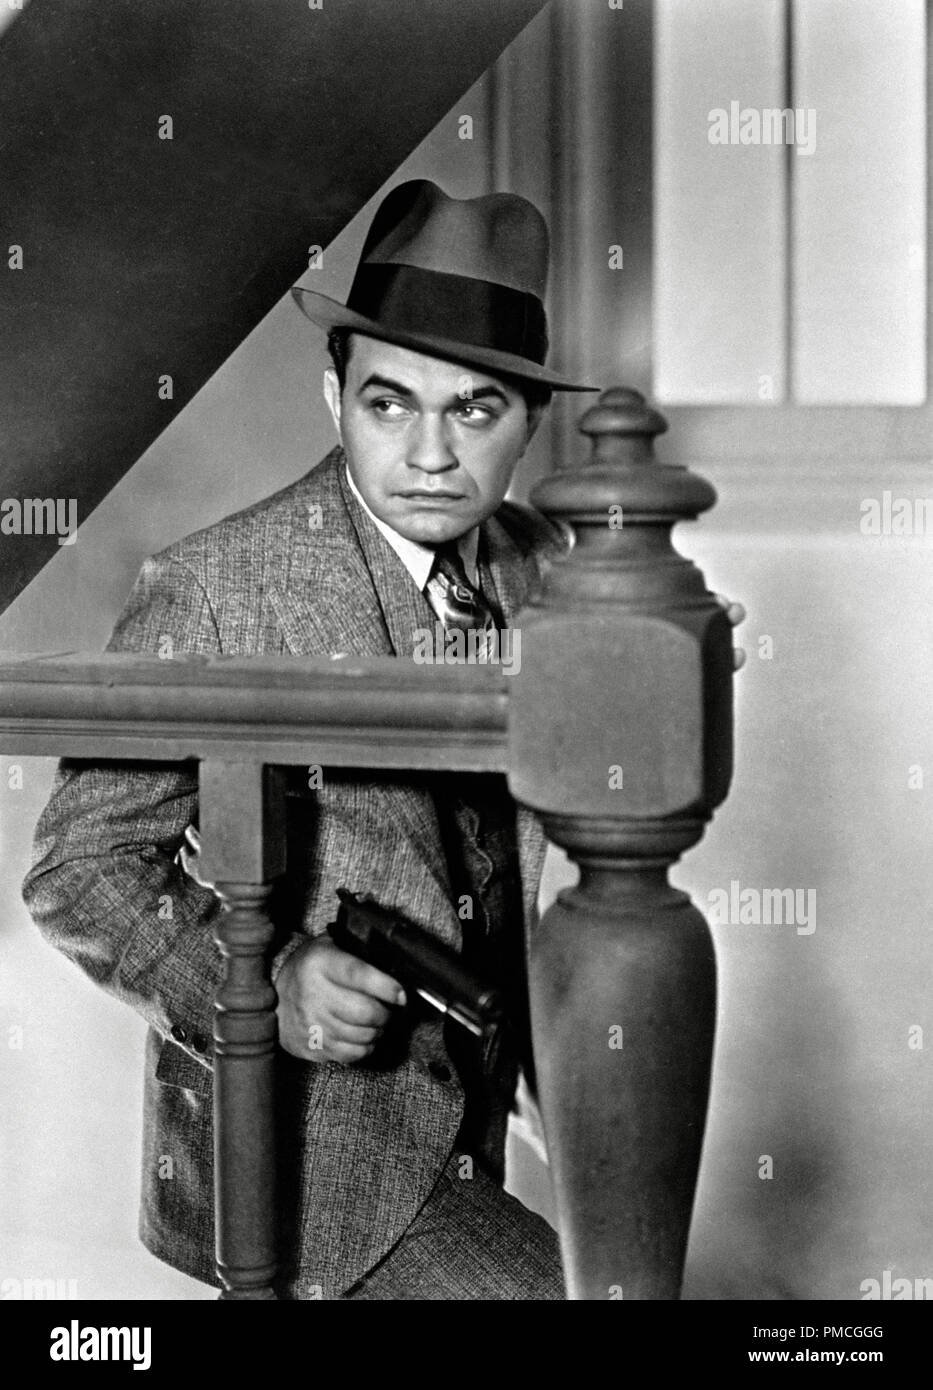 Edward G. Robinson, 'Little Caesar' (1931) First National Pictures  File Reference # 33536 873THA  For Editorial Use Only -  All Rights Reserved Stock Photo